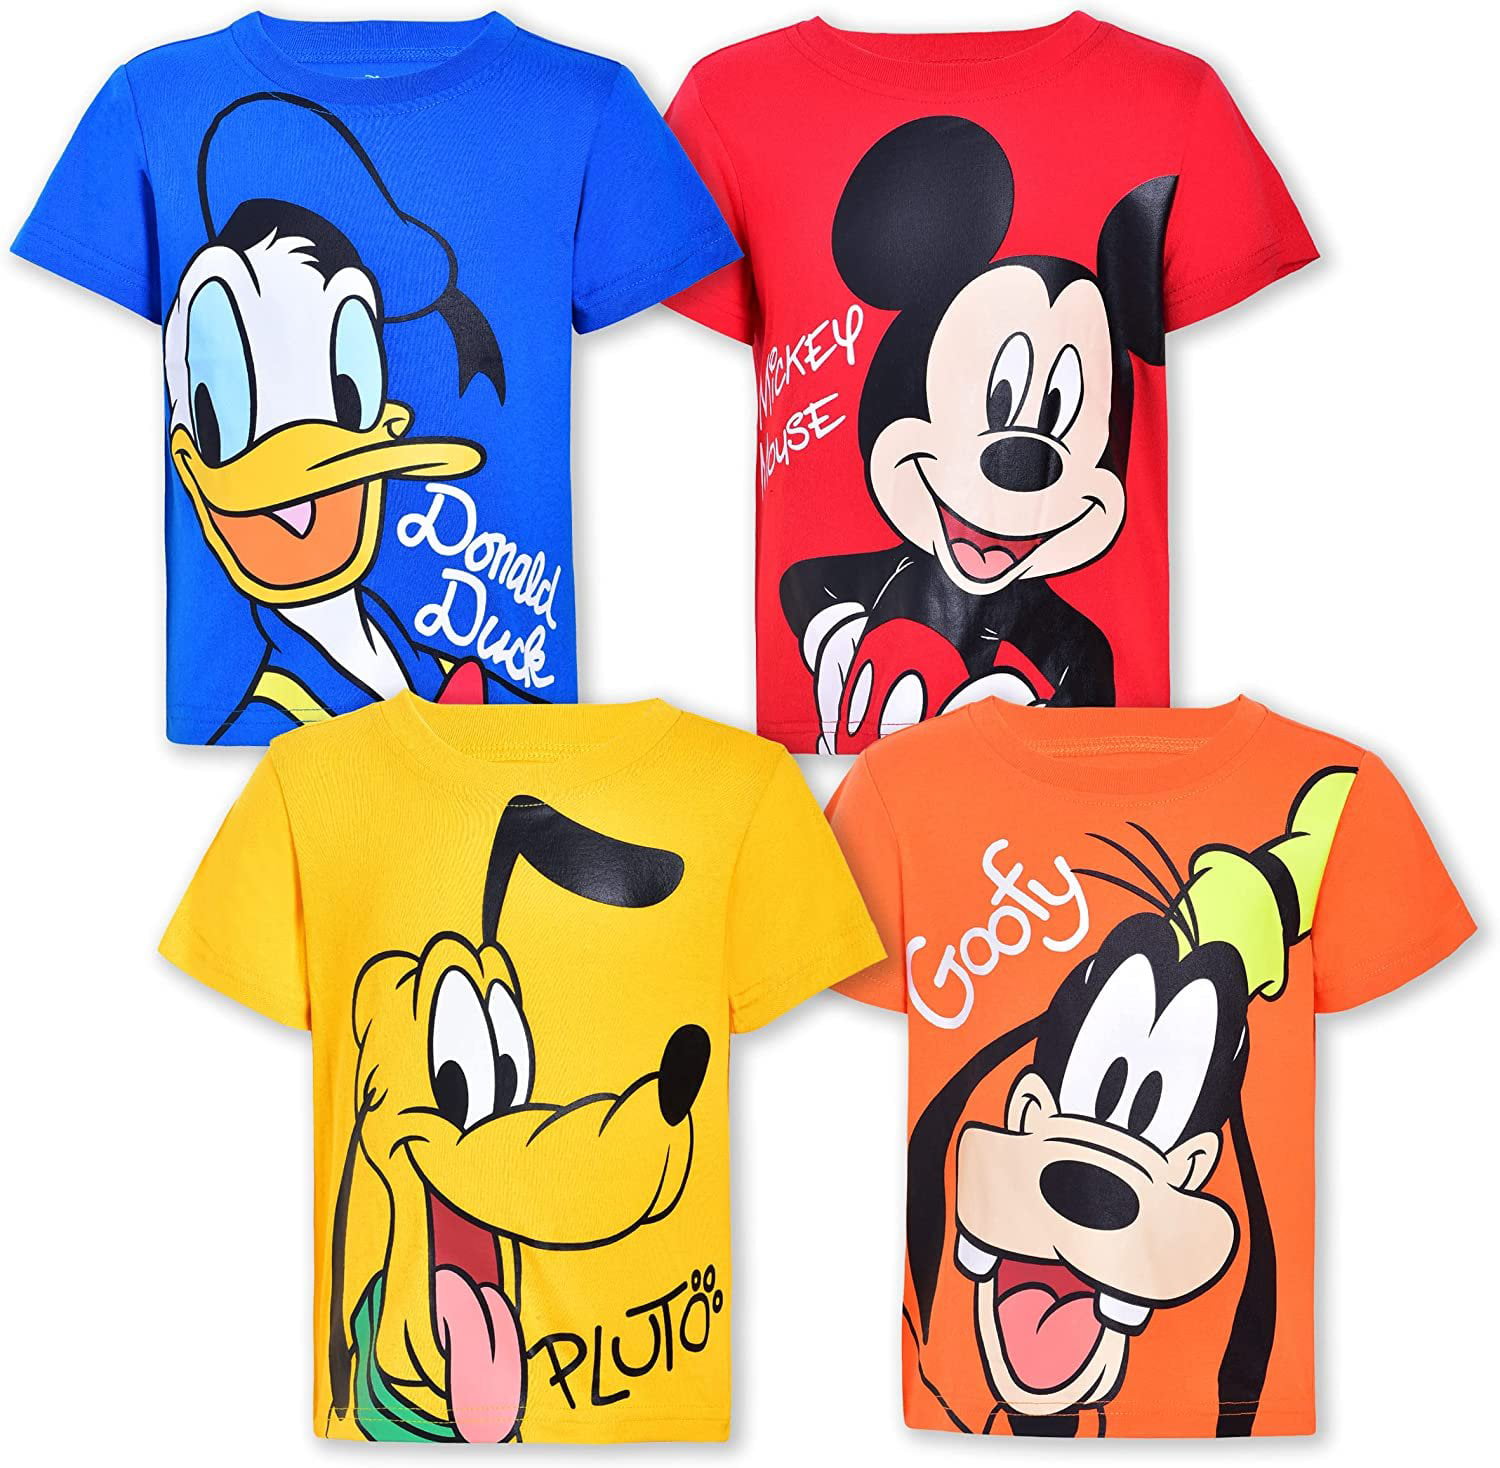 Disney Boy's 4-Pack Mickey and Friends Short Sleeves Graphic Tee Shirt,  Blue/Orange/Red/Yellow, 2T